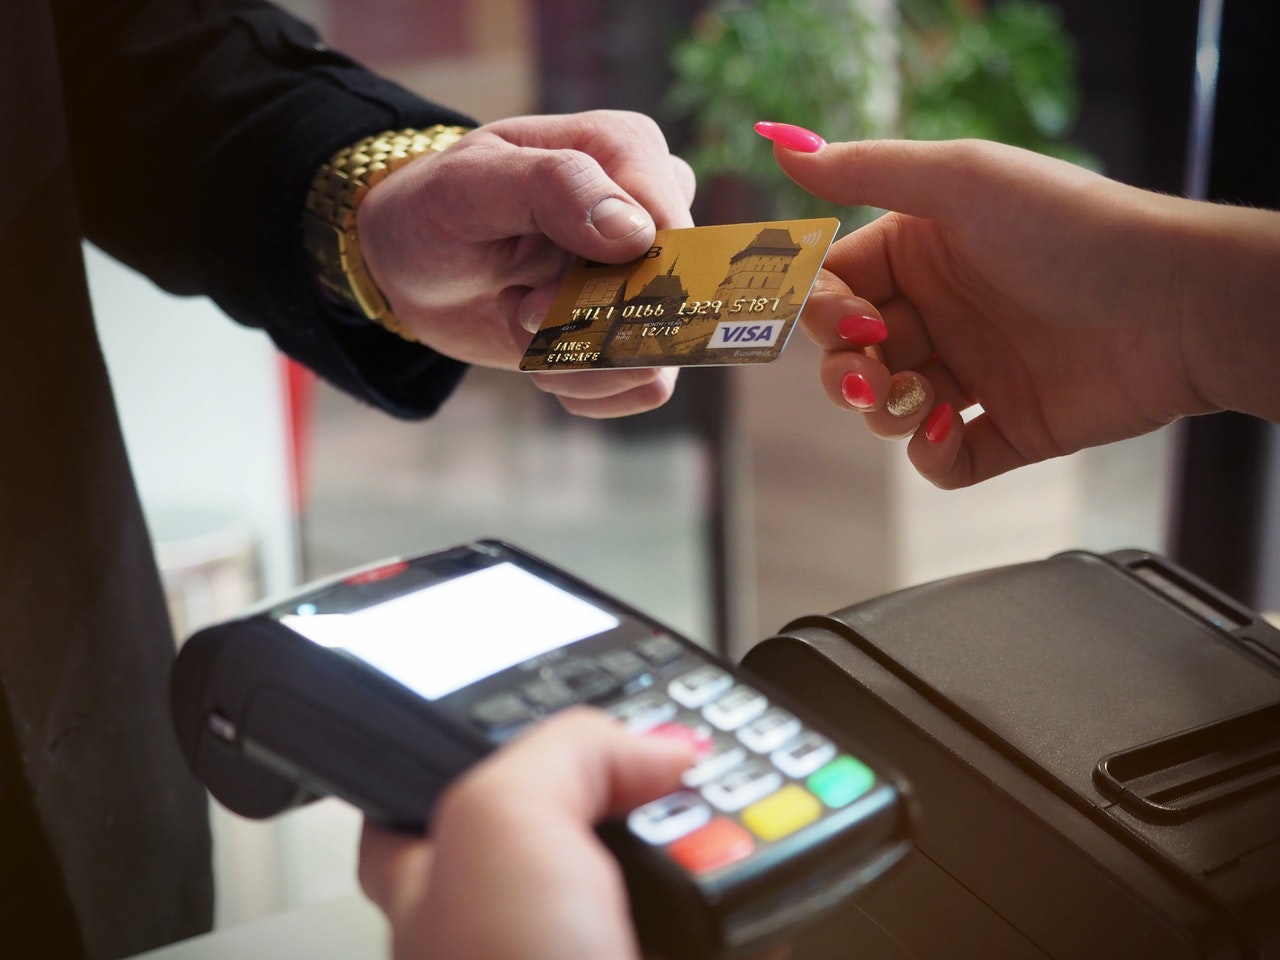 A customer pays using a credit card reader